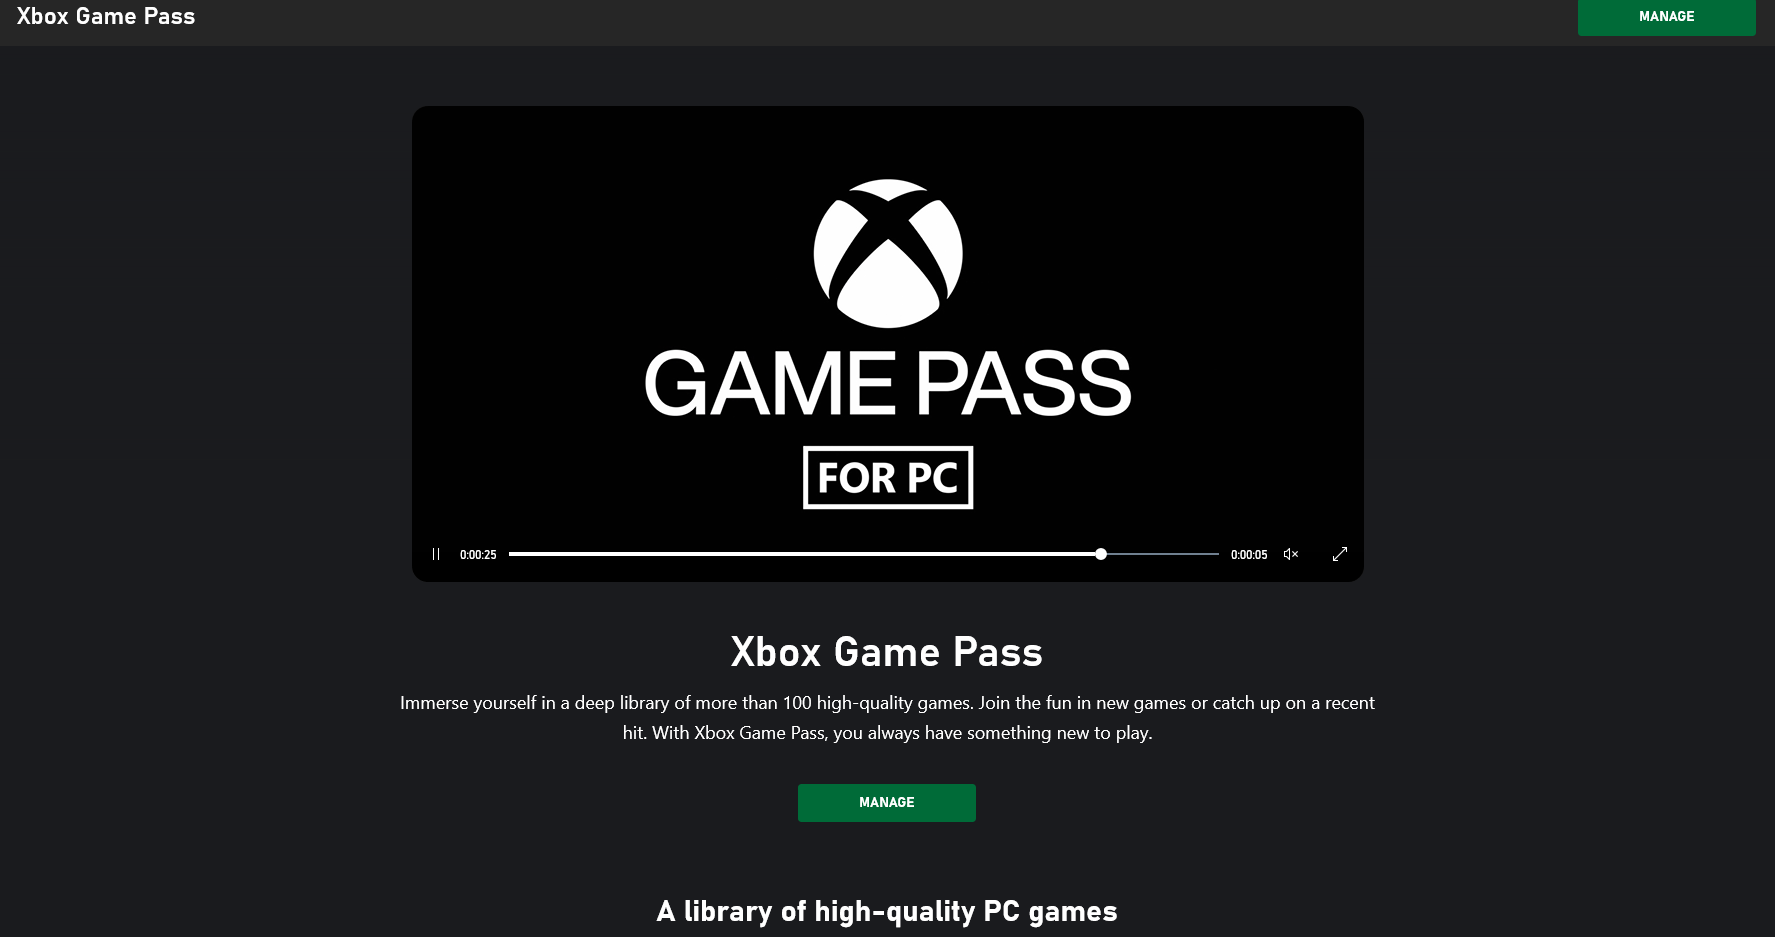 Back 4 Blood Heading To Xbox Game Pass